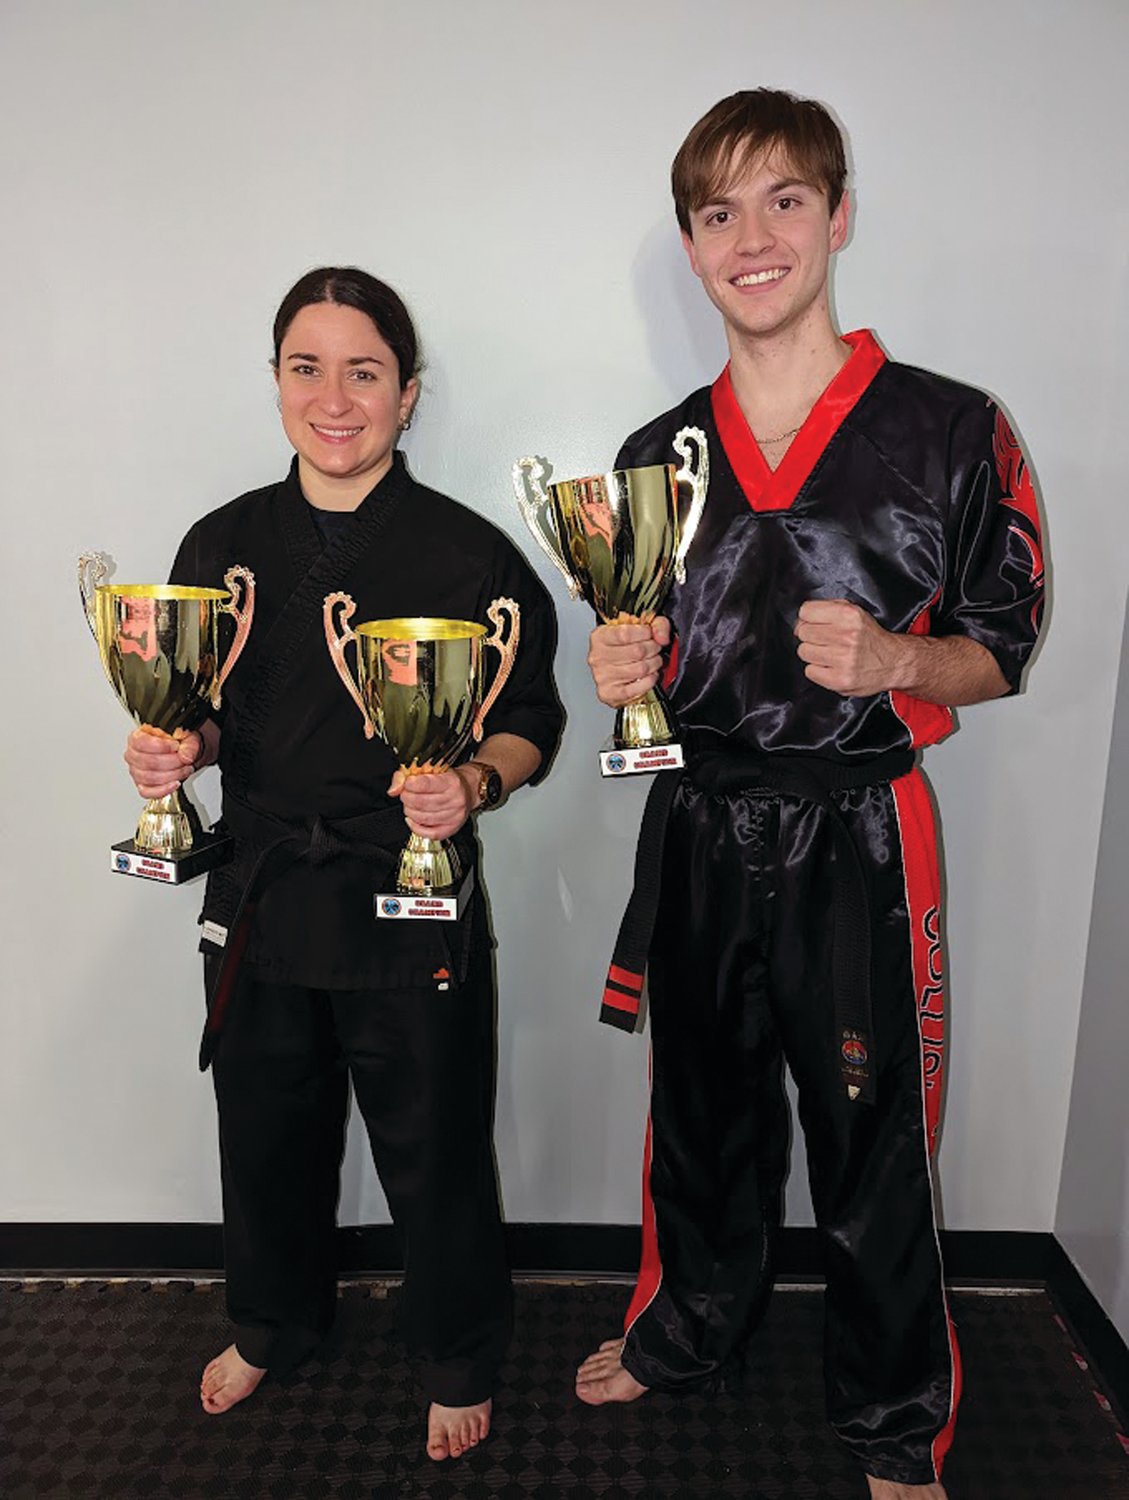 NATIONAL CHAMPS: Ashley Sacrey and Anthony Zangari, who took first place overall at the KRANE National Championships. (Submitted photos)